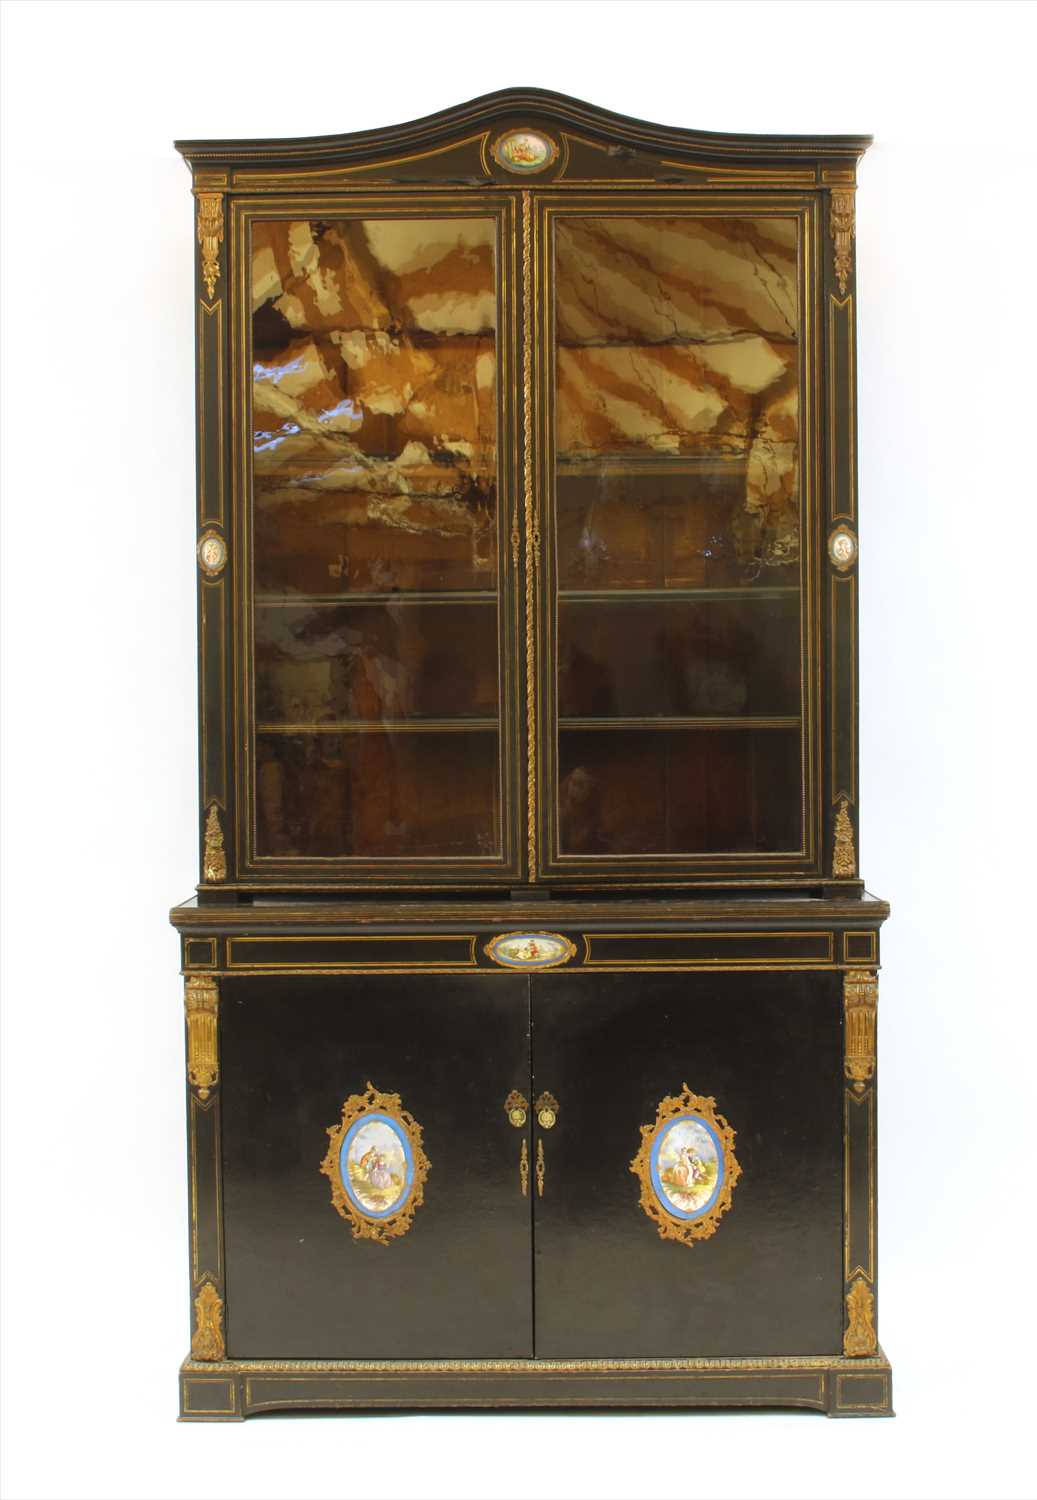 Early 19th c. French Lacquered Bookcase with Sevres Plaques